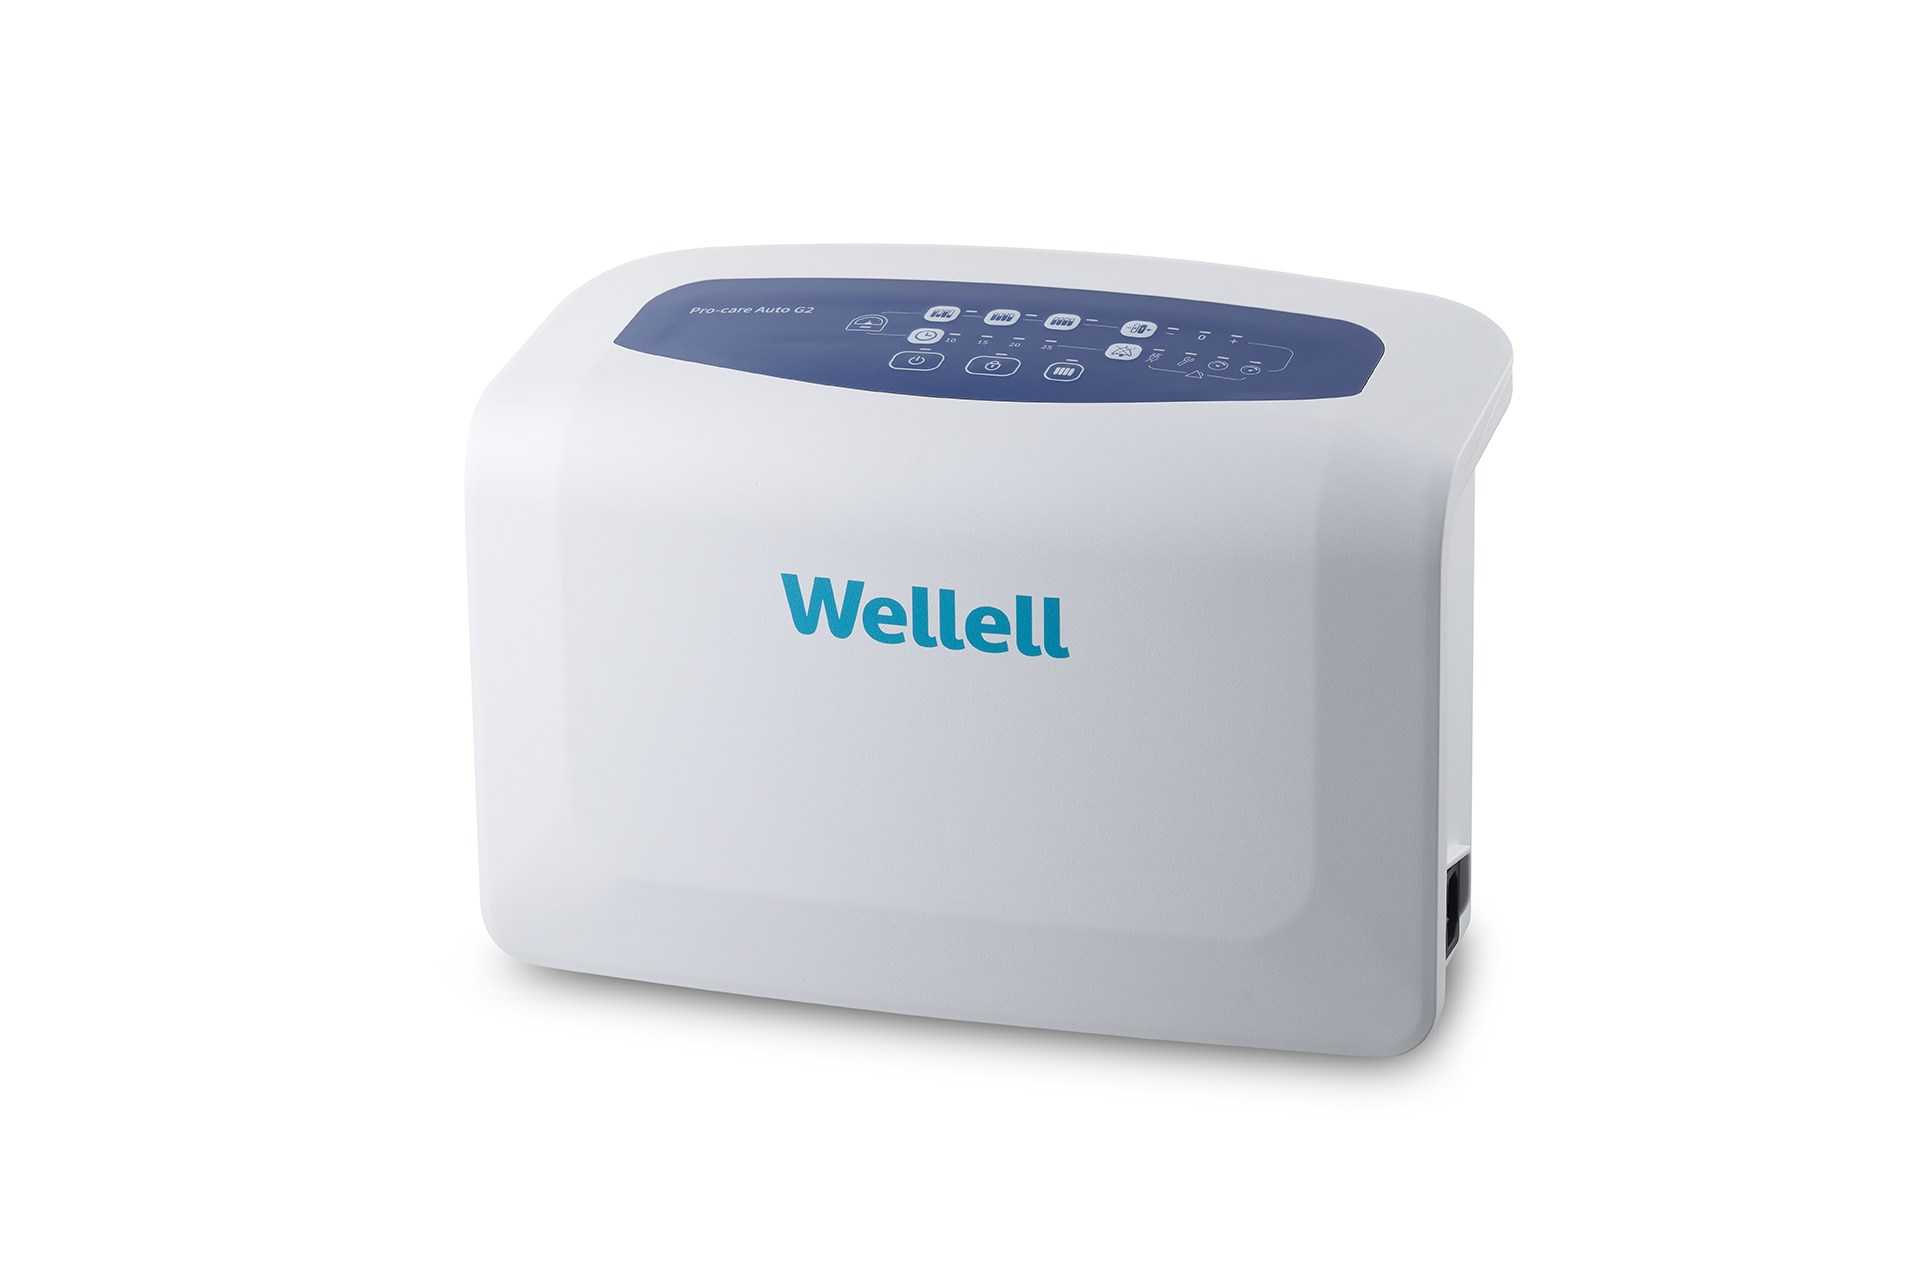 Pro-care Auto - Intuitive LCD pump interface gives easy access to control pressure settings, times, and alarms -Wellell UK